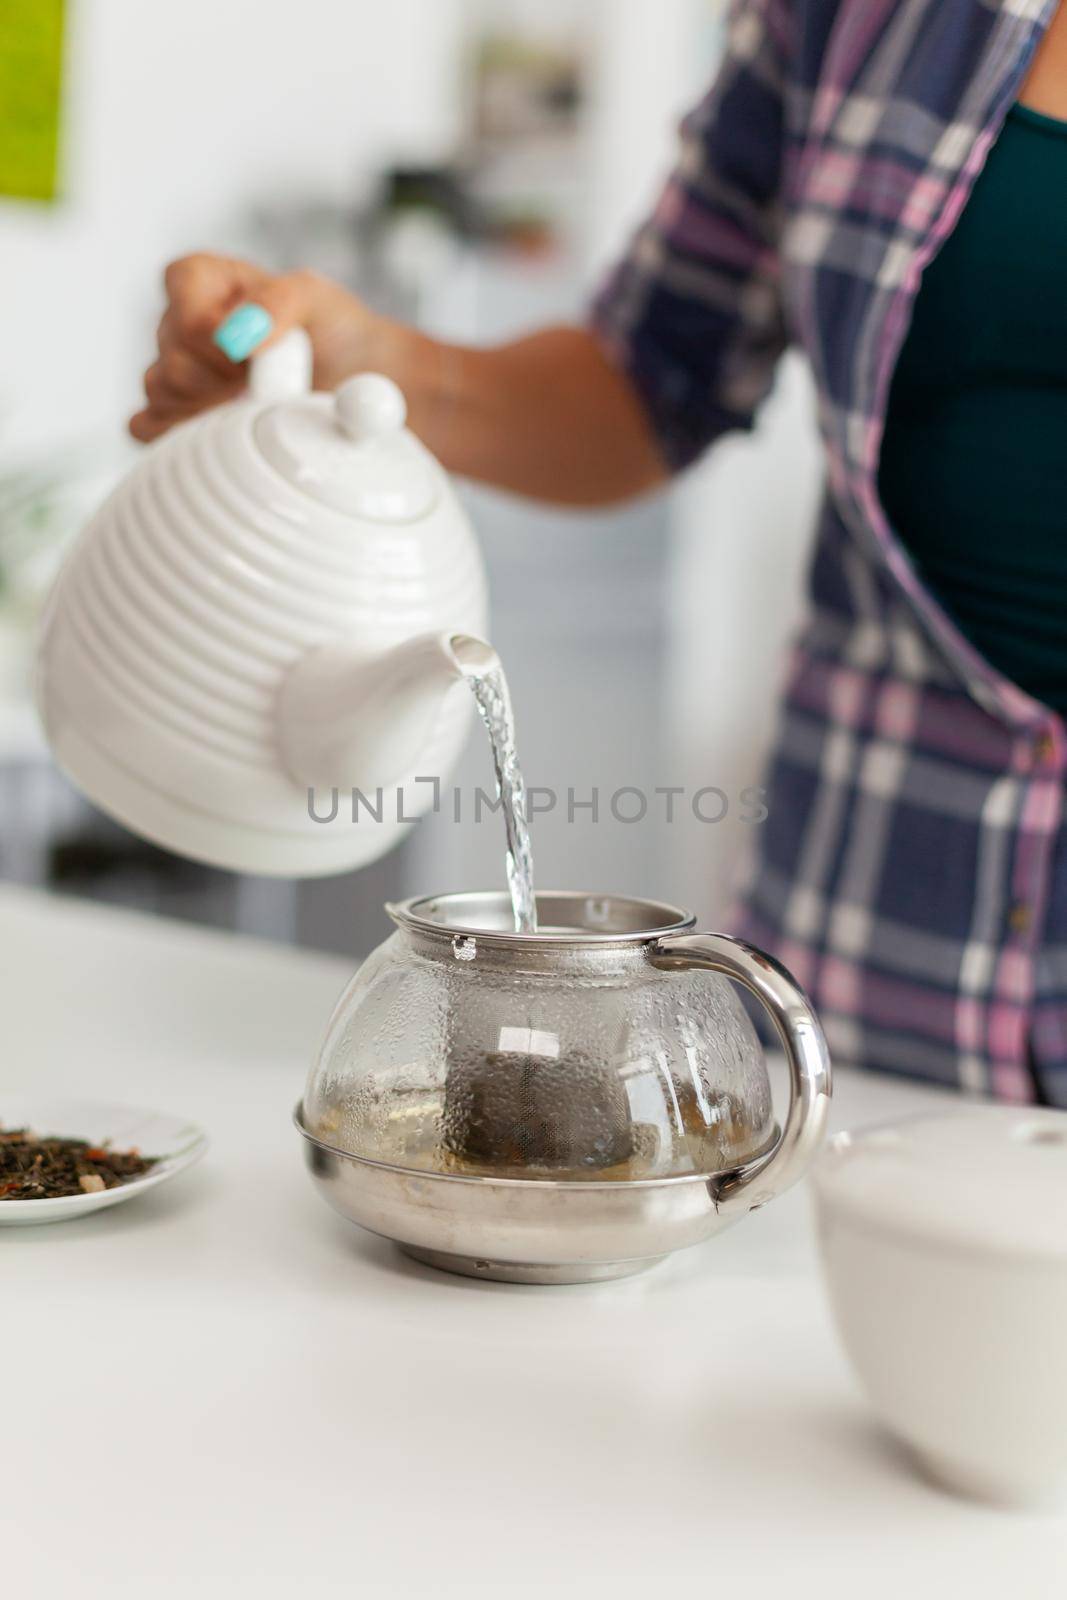 Close up of pouring hot water over natural aromatic herbs to make tea. Woman, lifestylem, beverage, preparation, herbal, teapot, morning, aromatic, lifestyle